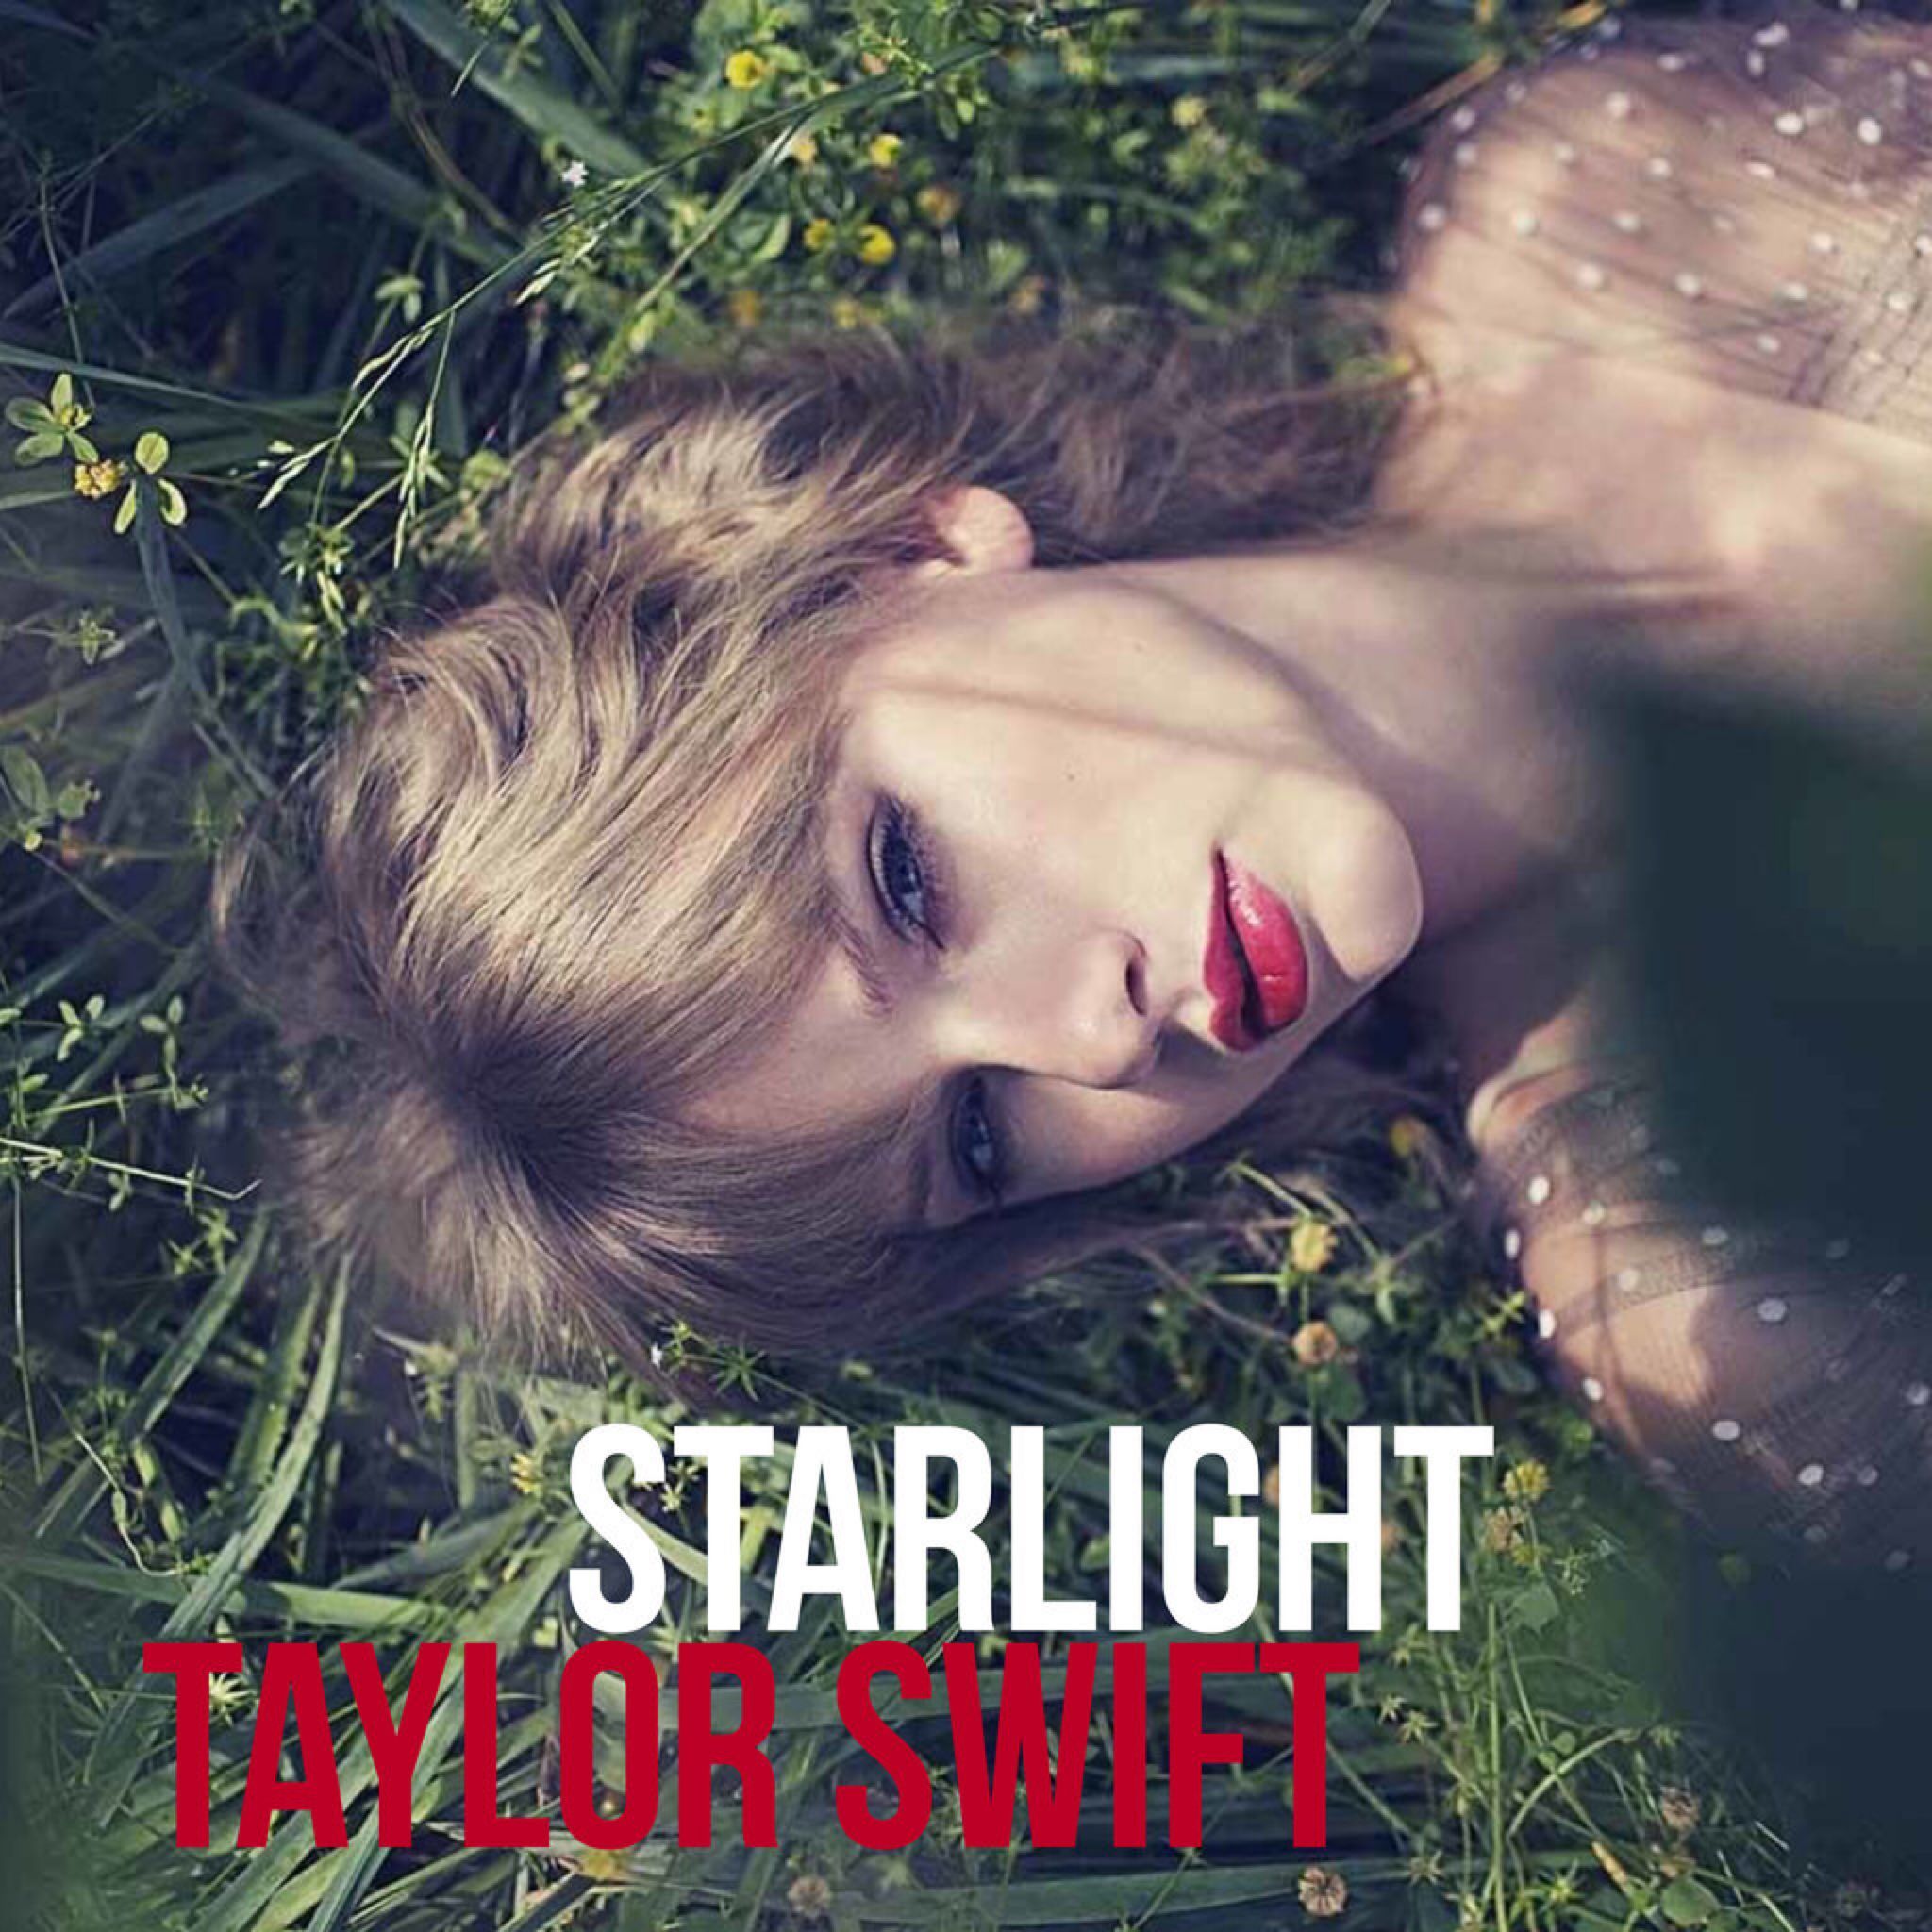 Taylor Swift. Taylor swift single, Taylor swift songs, Taylor swift red